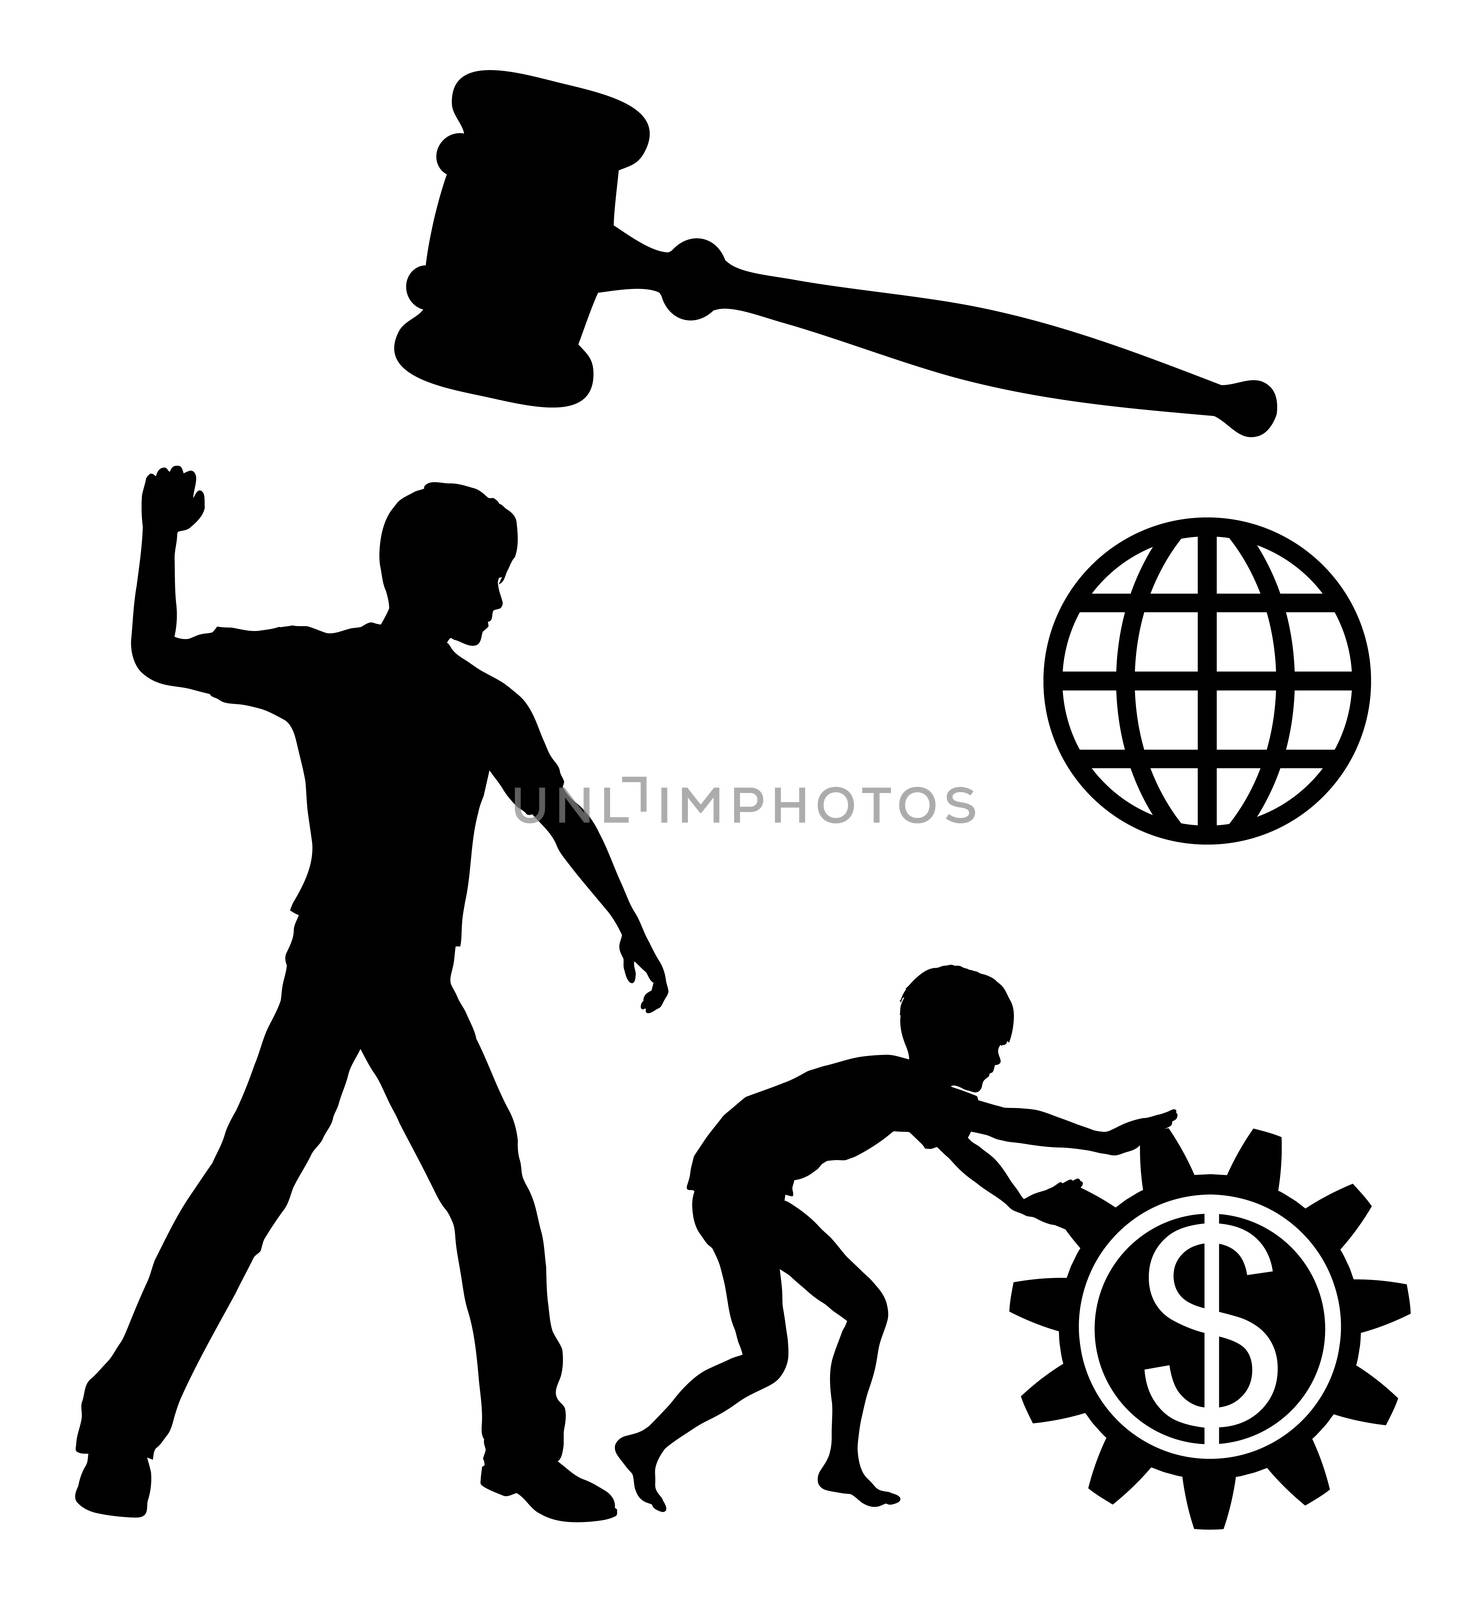 Child laborers being abused by business and industries in order to yield high profits must be prohibited by law worldwide